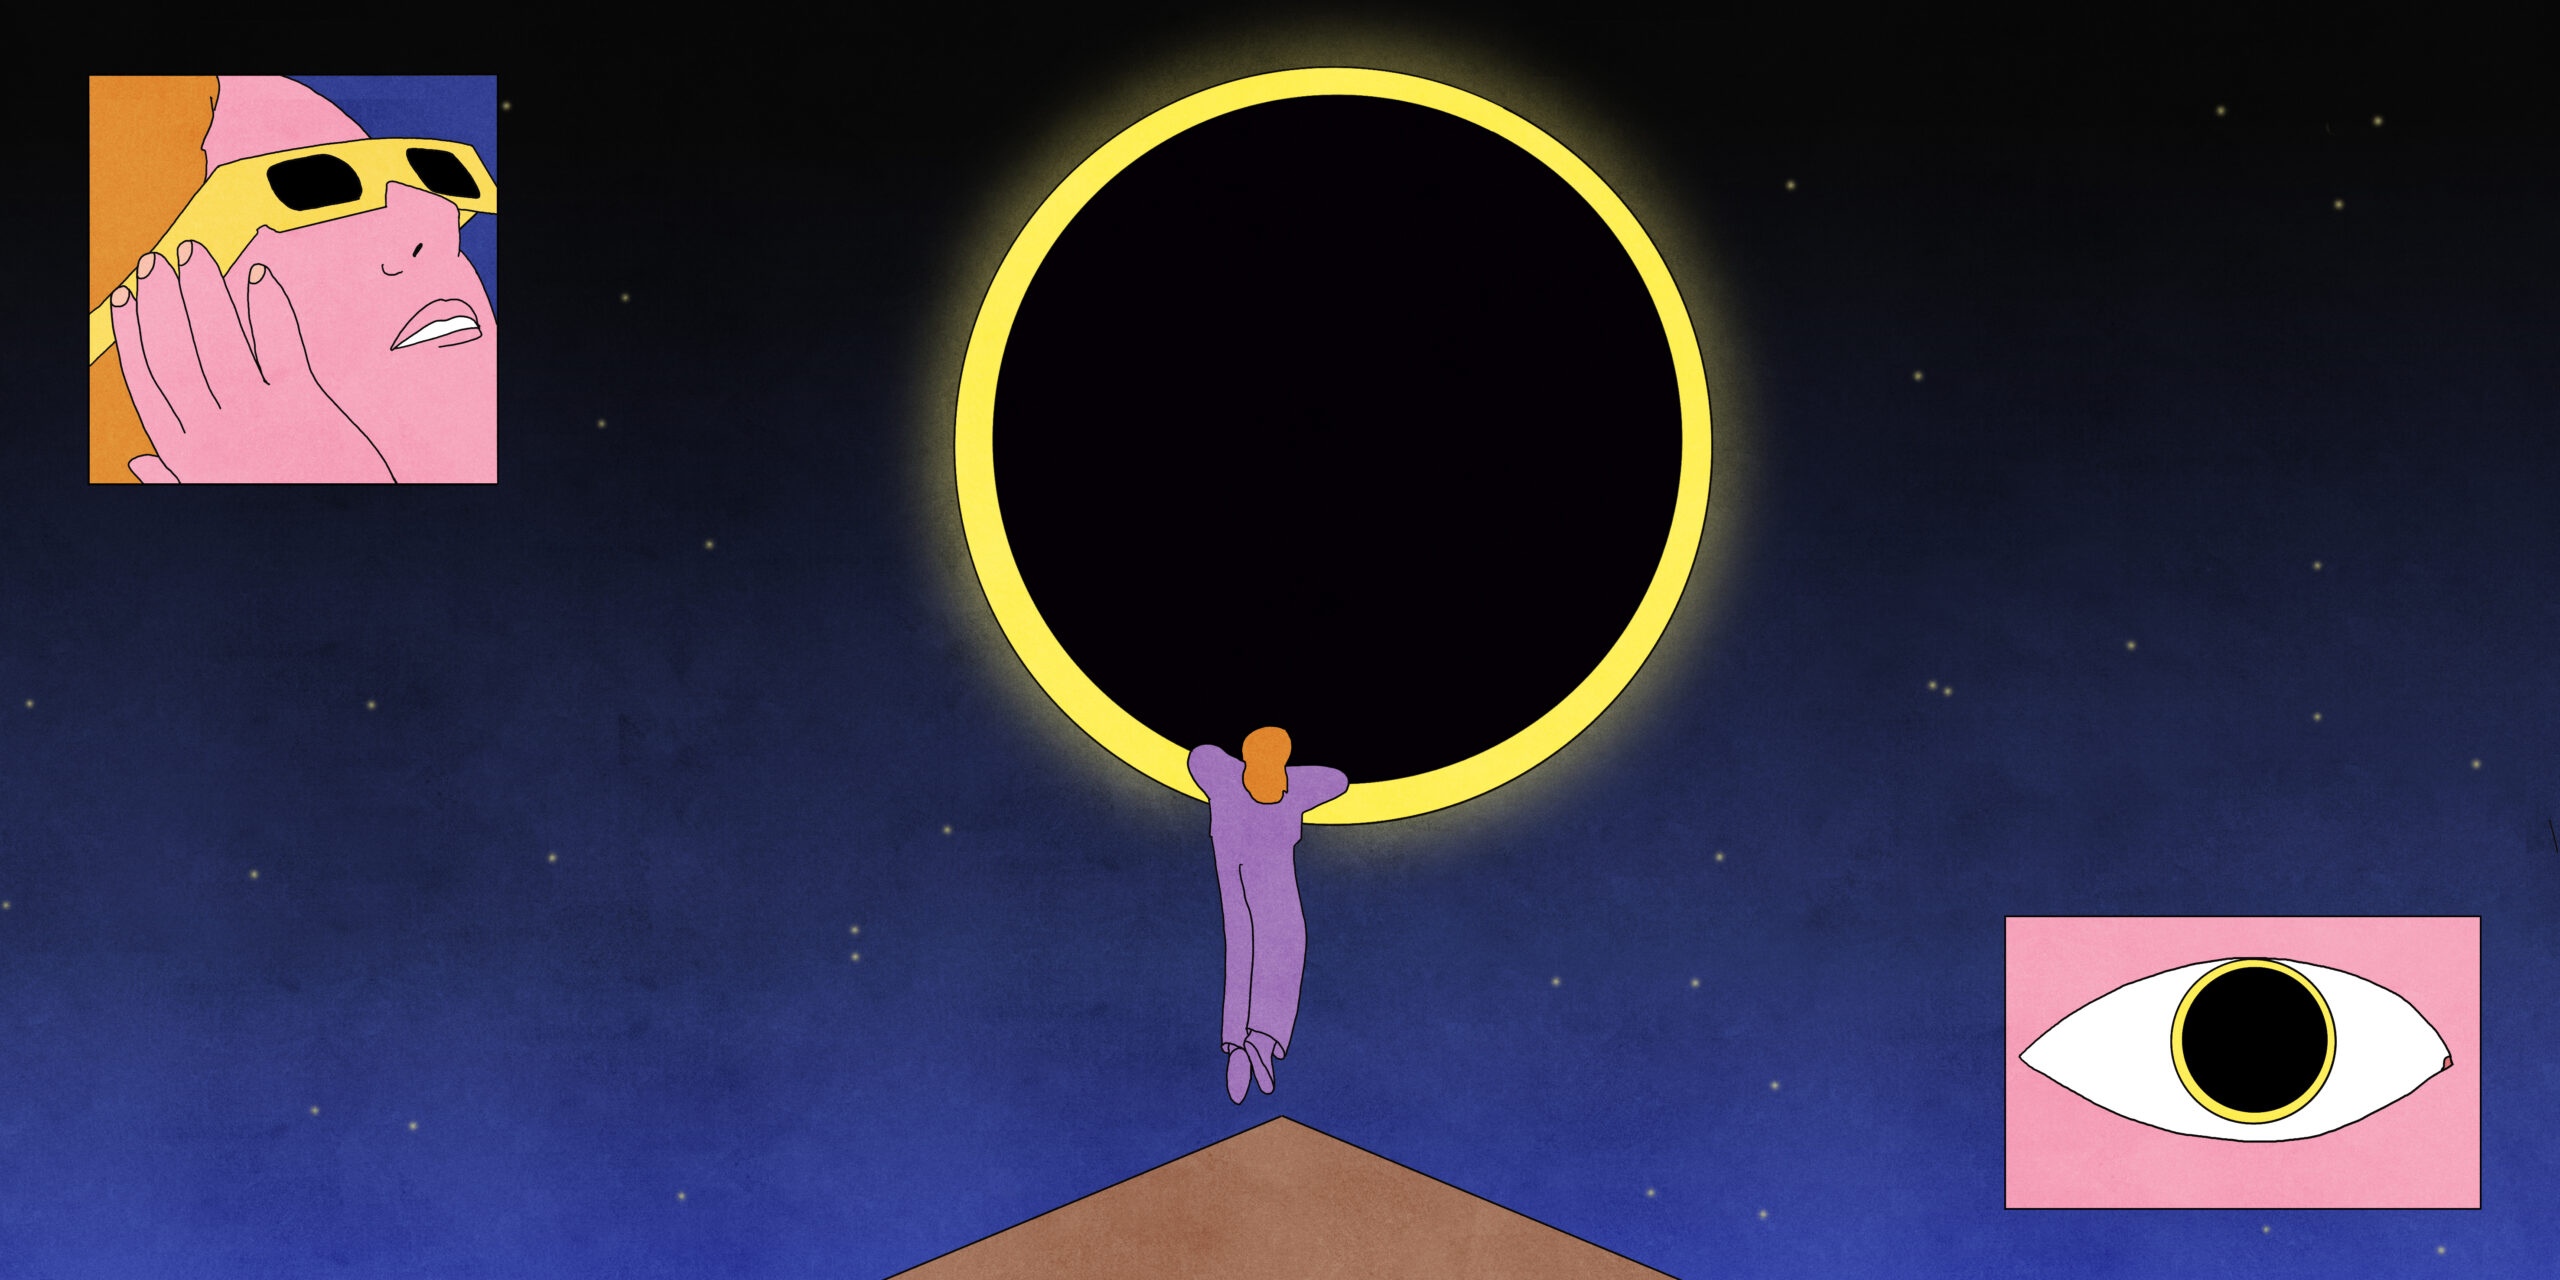 An illustration of a woman in a purple sweatsuit at the top of a mountain, climbing into the solar eclipse (a black circle overlapping with a yellow border, representing the moon and sun). In one corner, there's a inserted illustration of a woman looking up into the sky with protective glasses on, in the other corner, there's a close-up illustration of an eye where the iris is replaced by the eclipse.